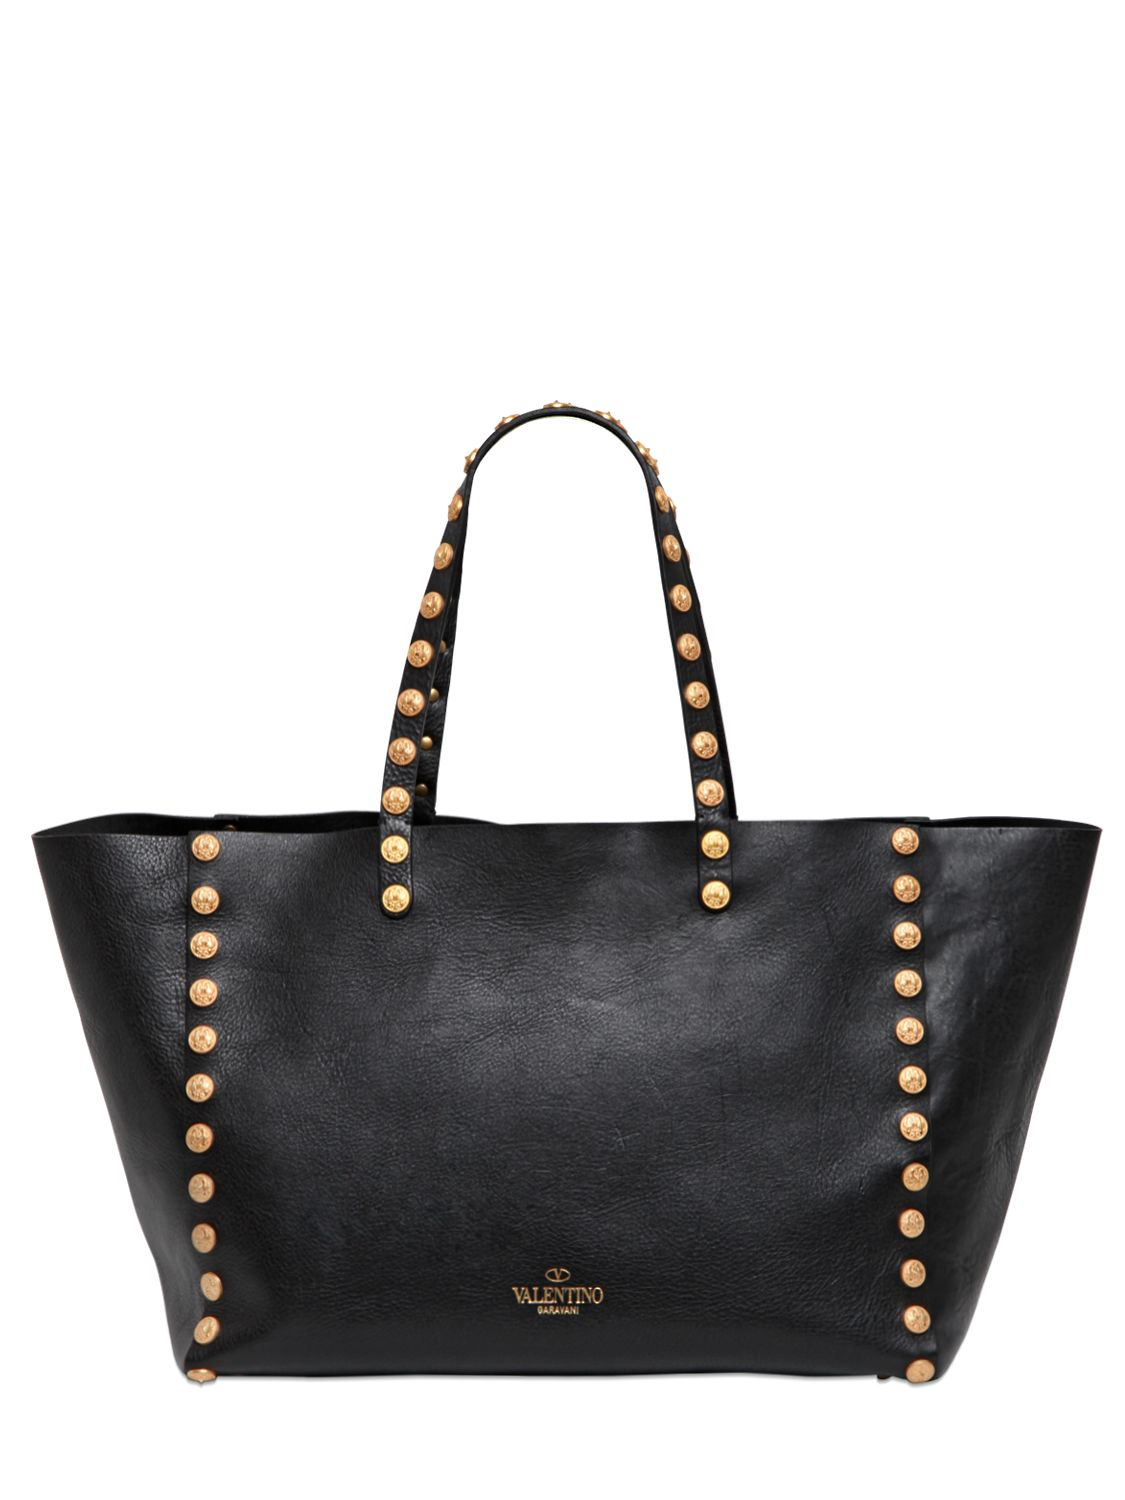 Lyst - Valentino Gryphon Studded Leather Tote Bag in Black